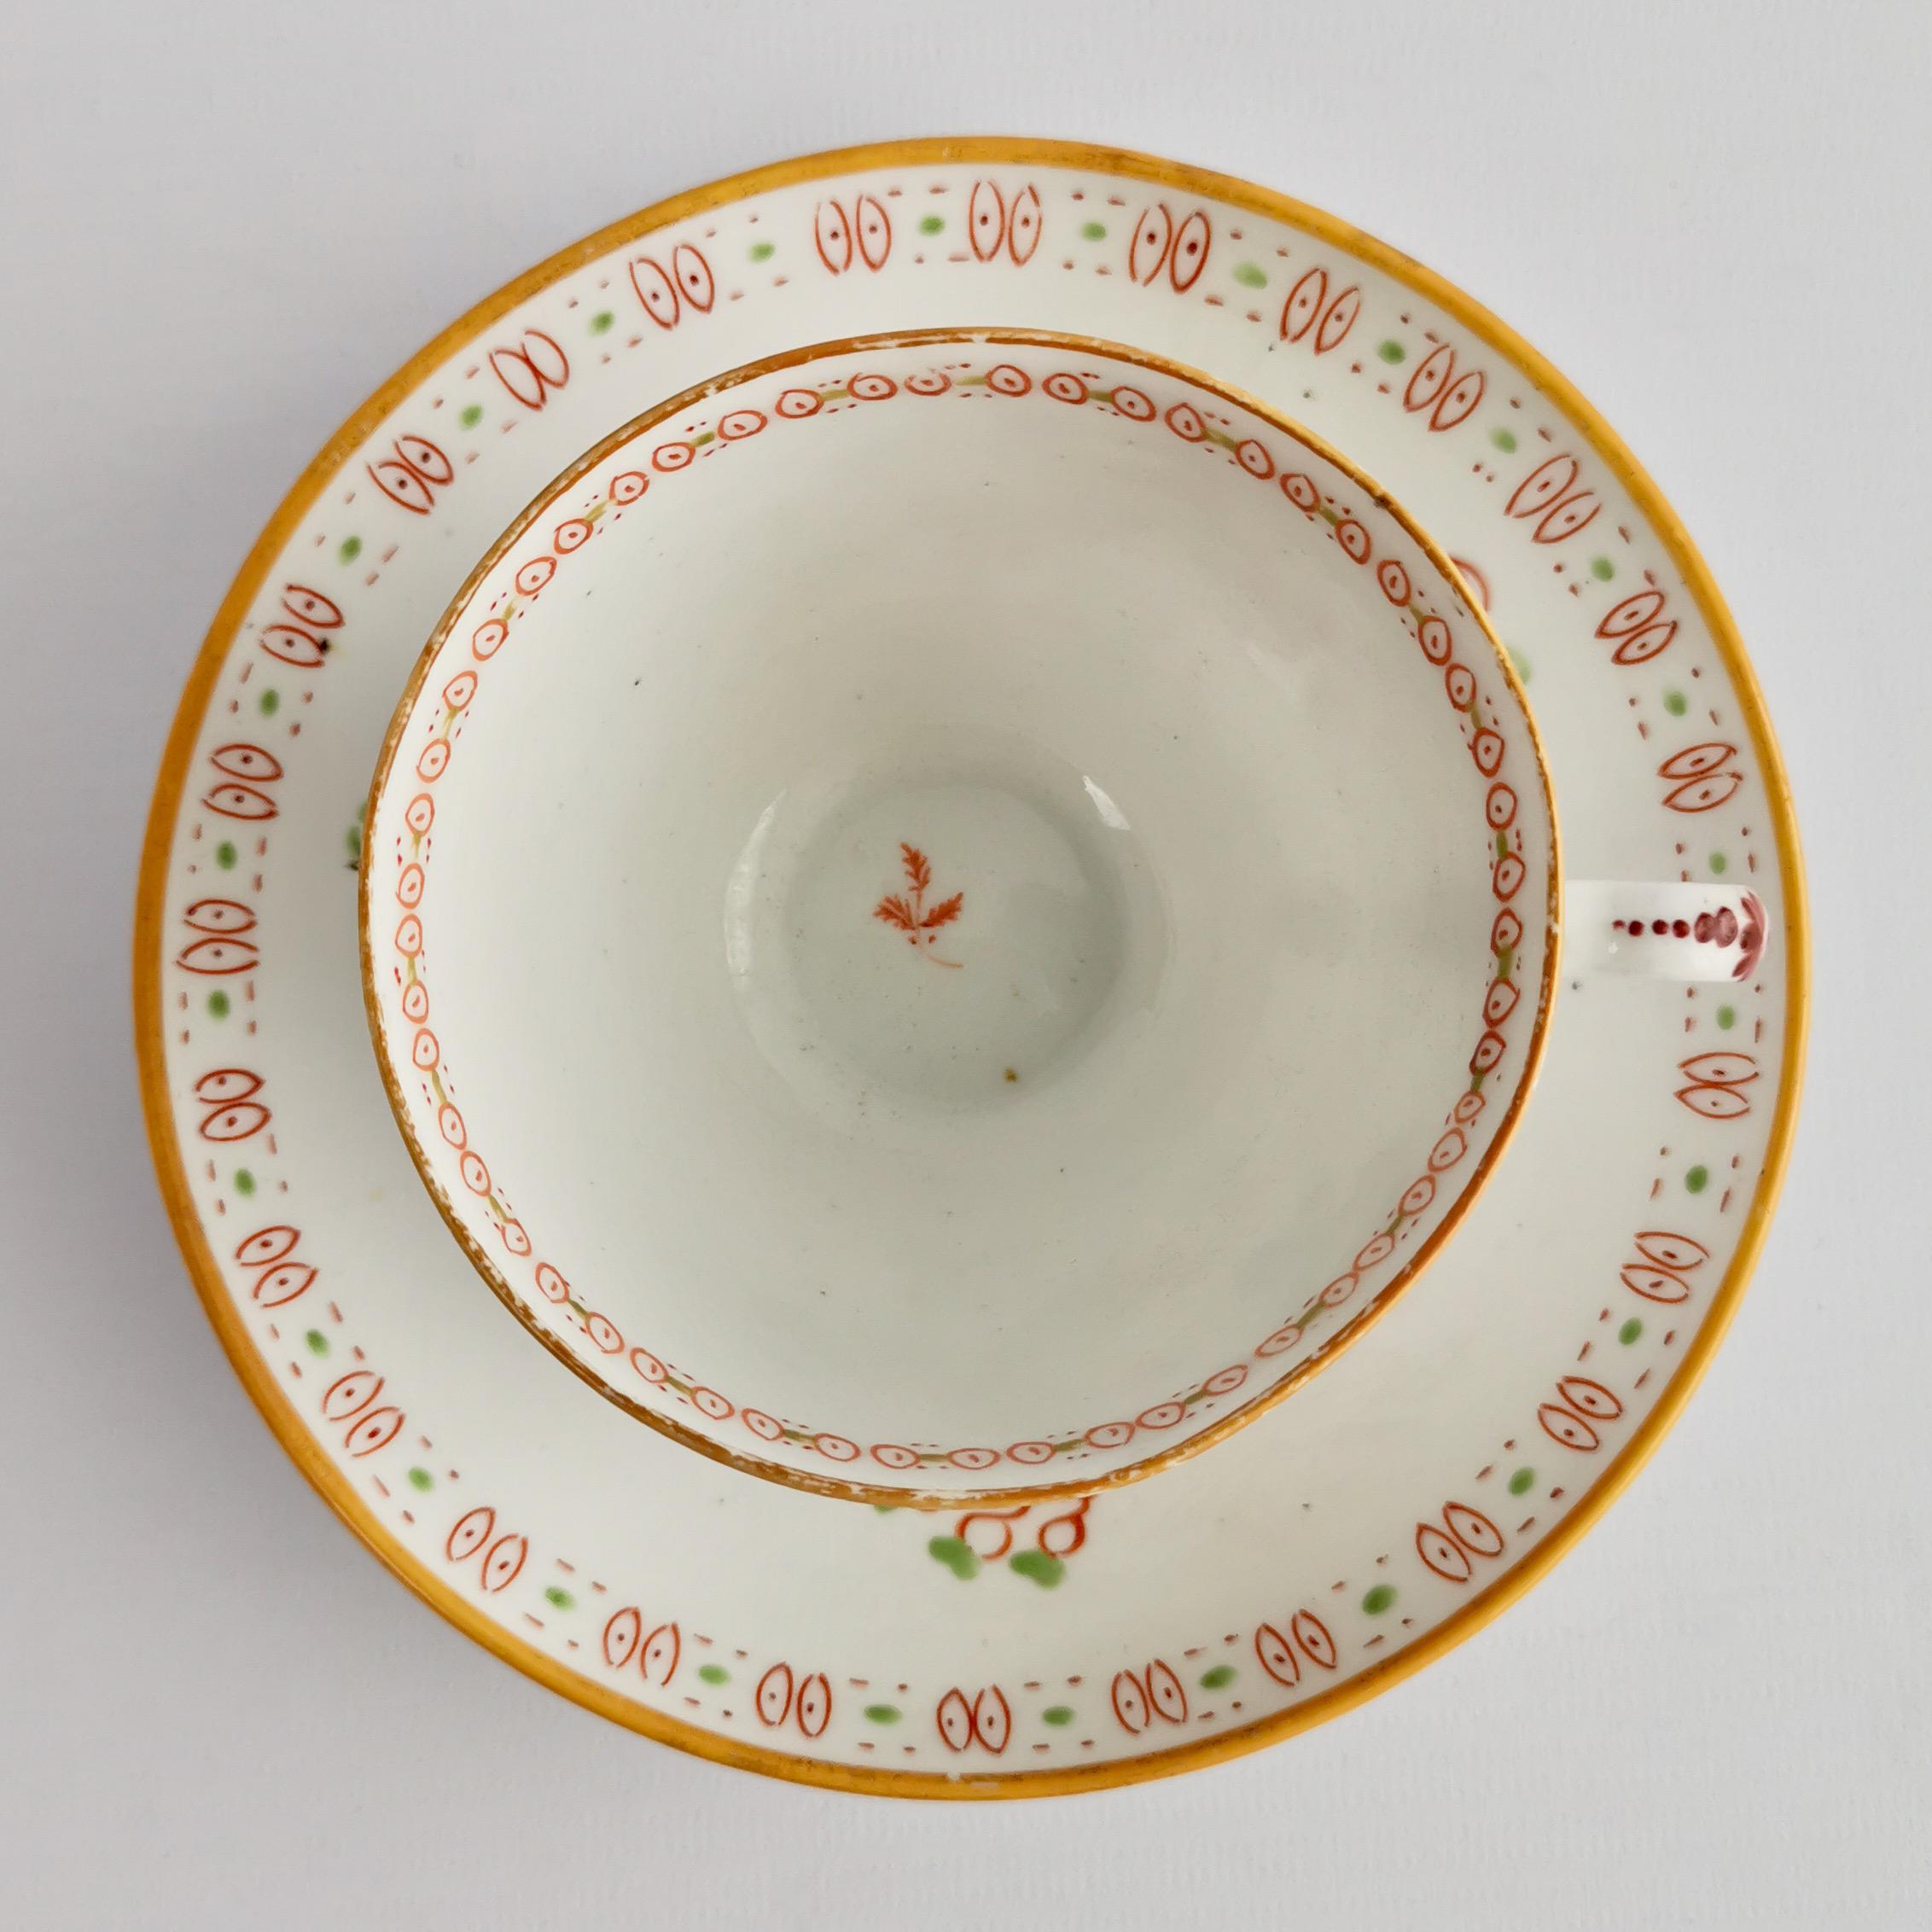 Hand-Painted New Hall Porcelain Teacup, Yellow Shell Pattern 1045, ca 1810